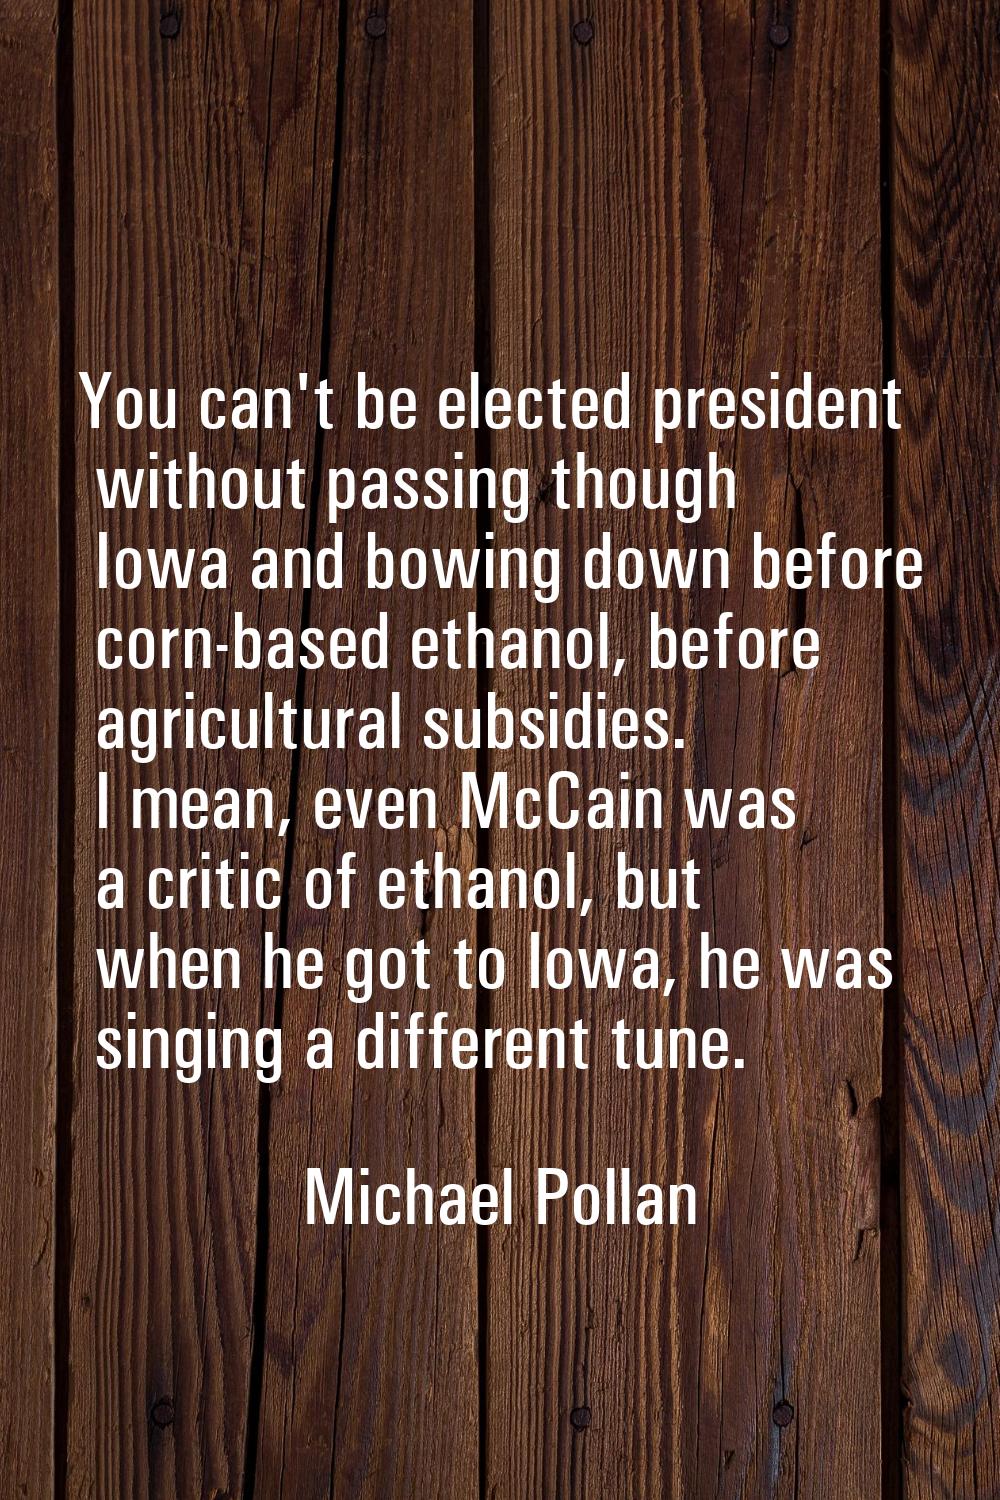 You can't be elected president without passing though Iowa and bowing down before corn-based ethano